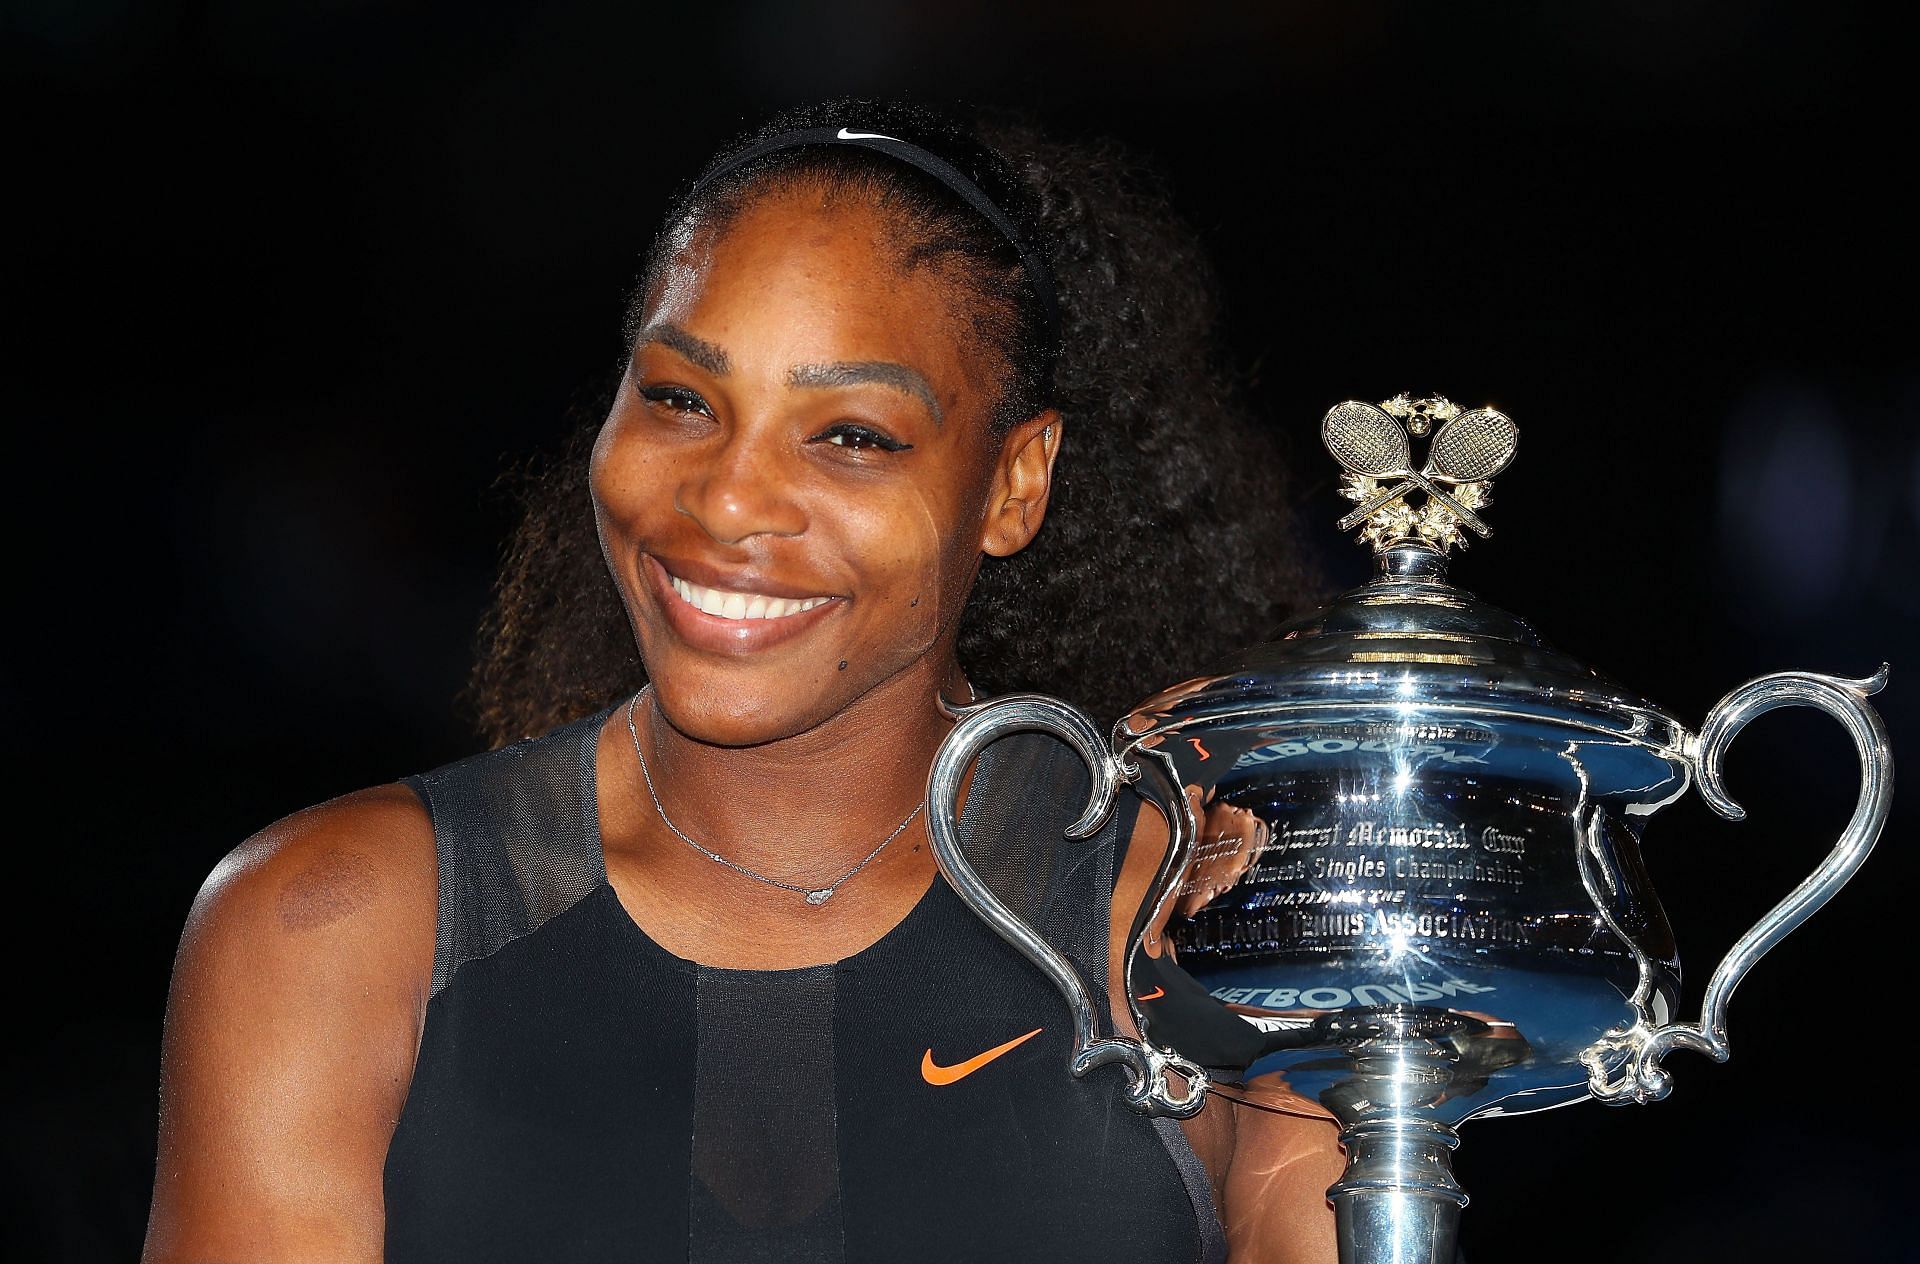 Serena Williams with the 2017 Australian Open title